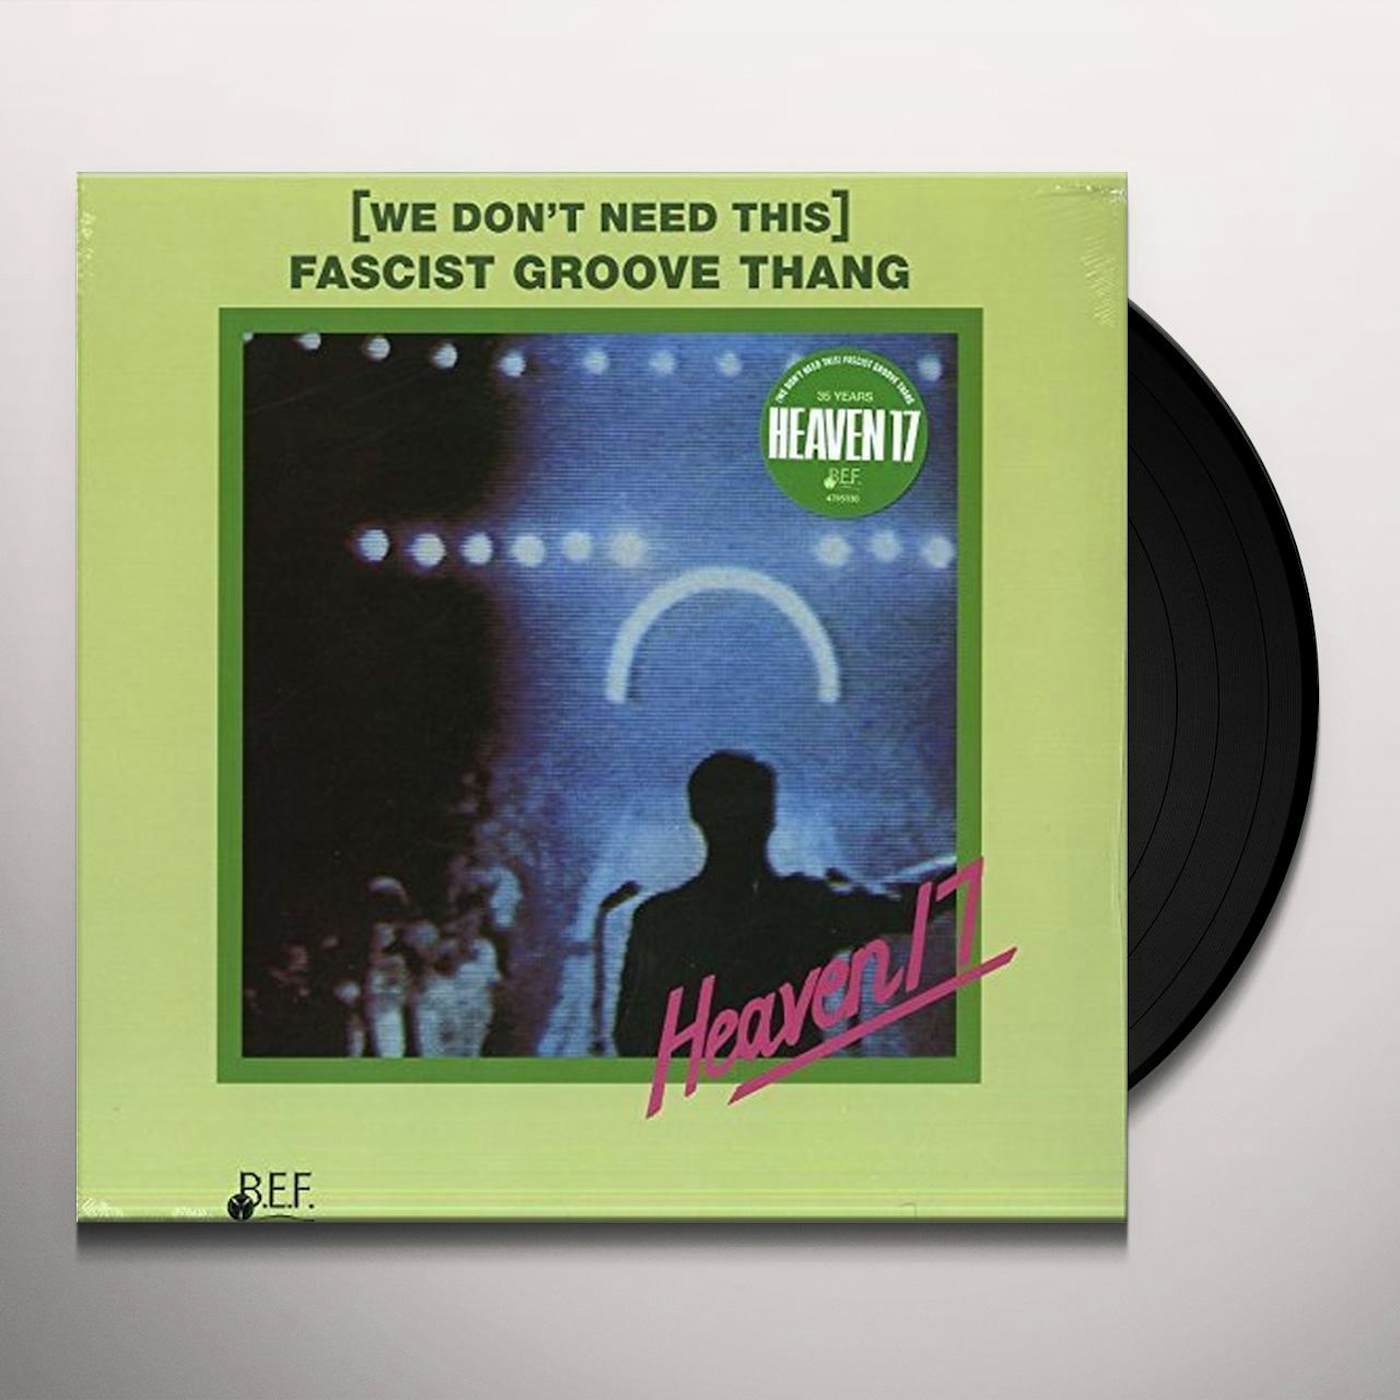 Heaven 17 (WE DON'T NEED THIS) FASCIST GROOVE THANG/DECLINE Vinyl Record